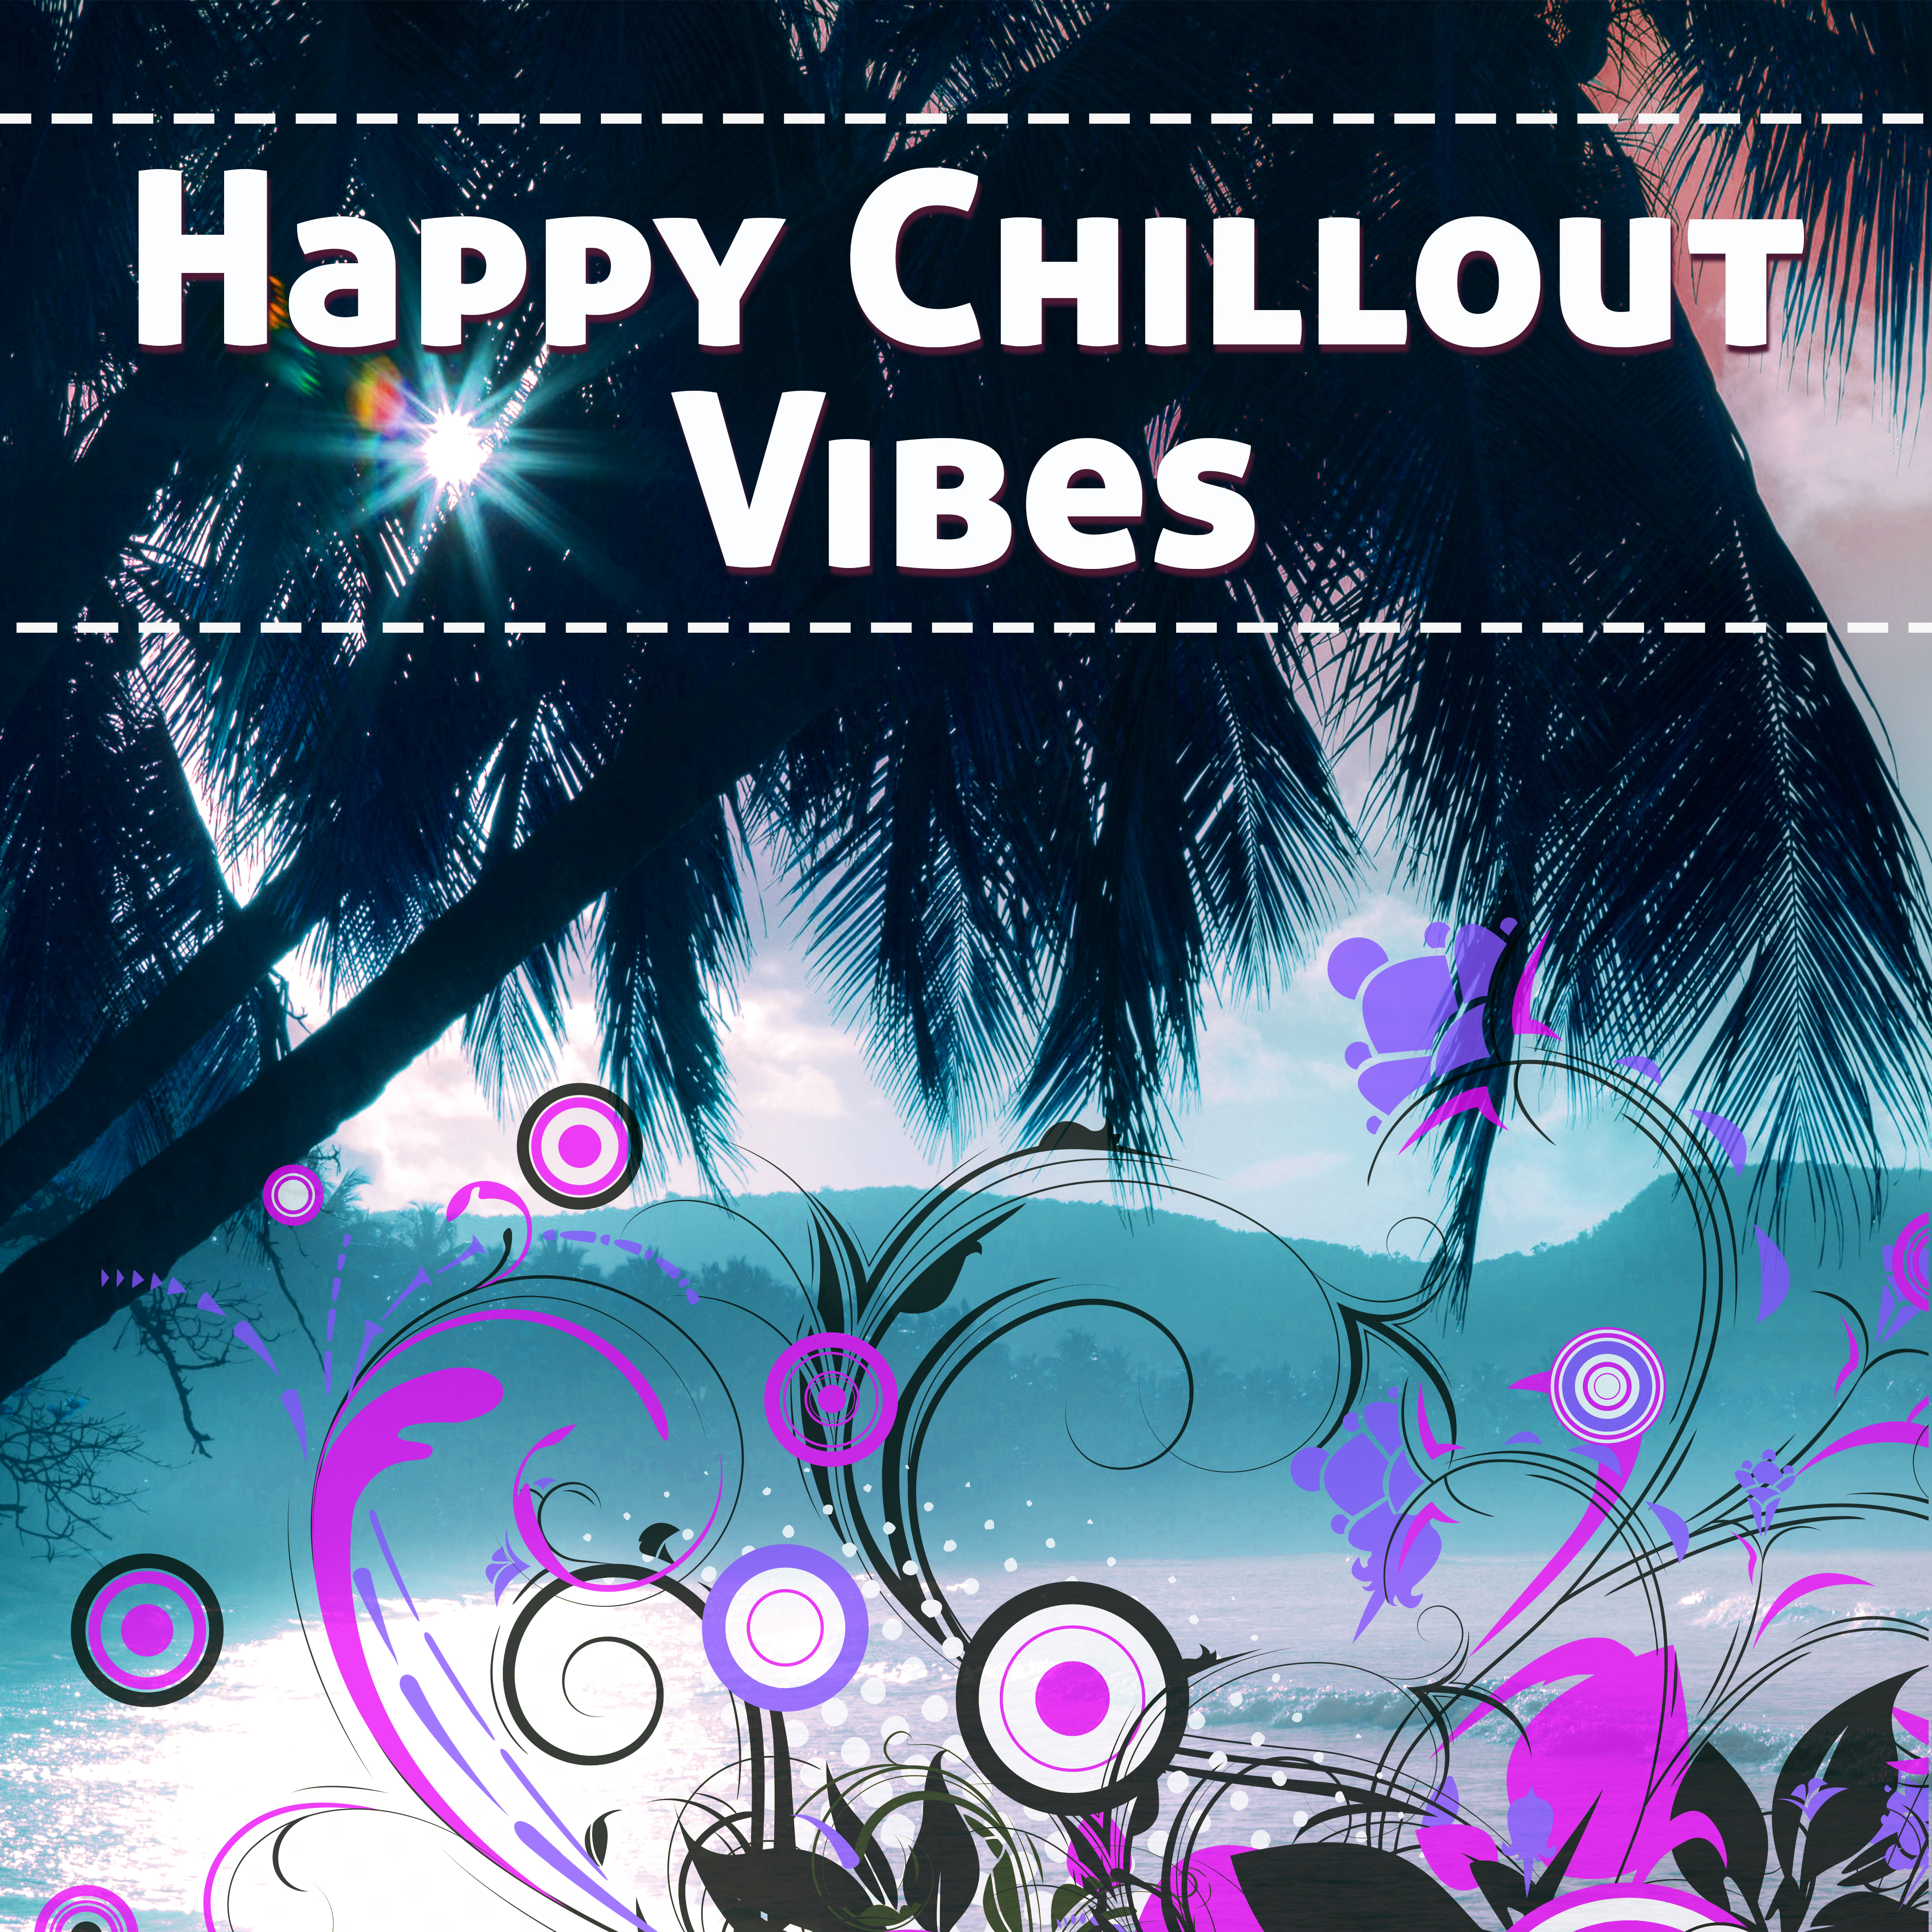 Happy Chillout Vibes  – Pure Chilllout, Electronic Music, Ibiza Chillout, Summer Chill Out